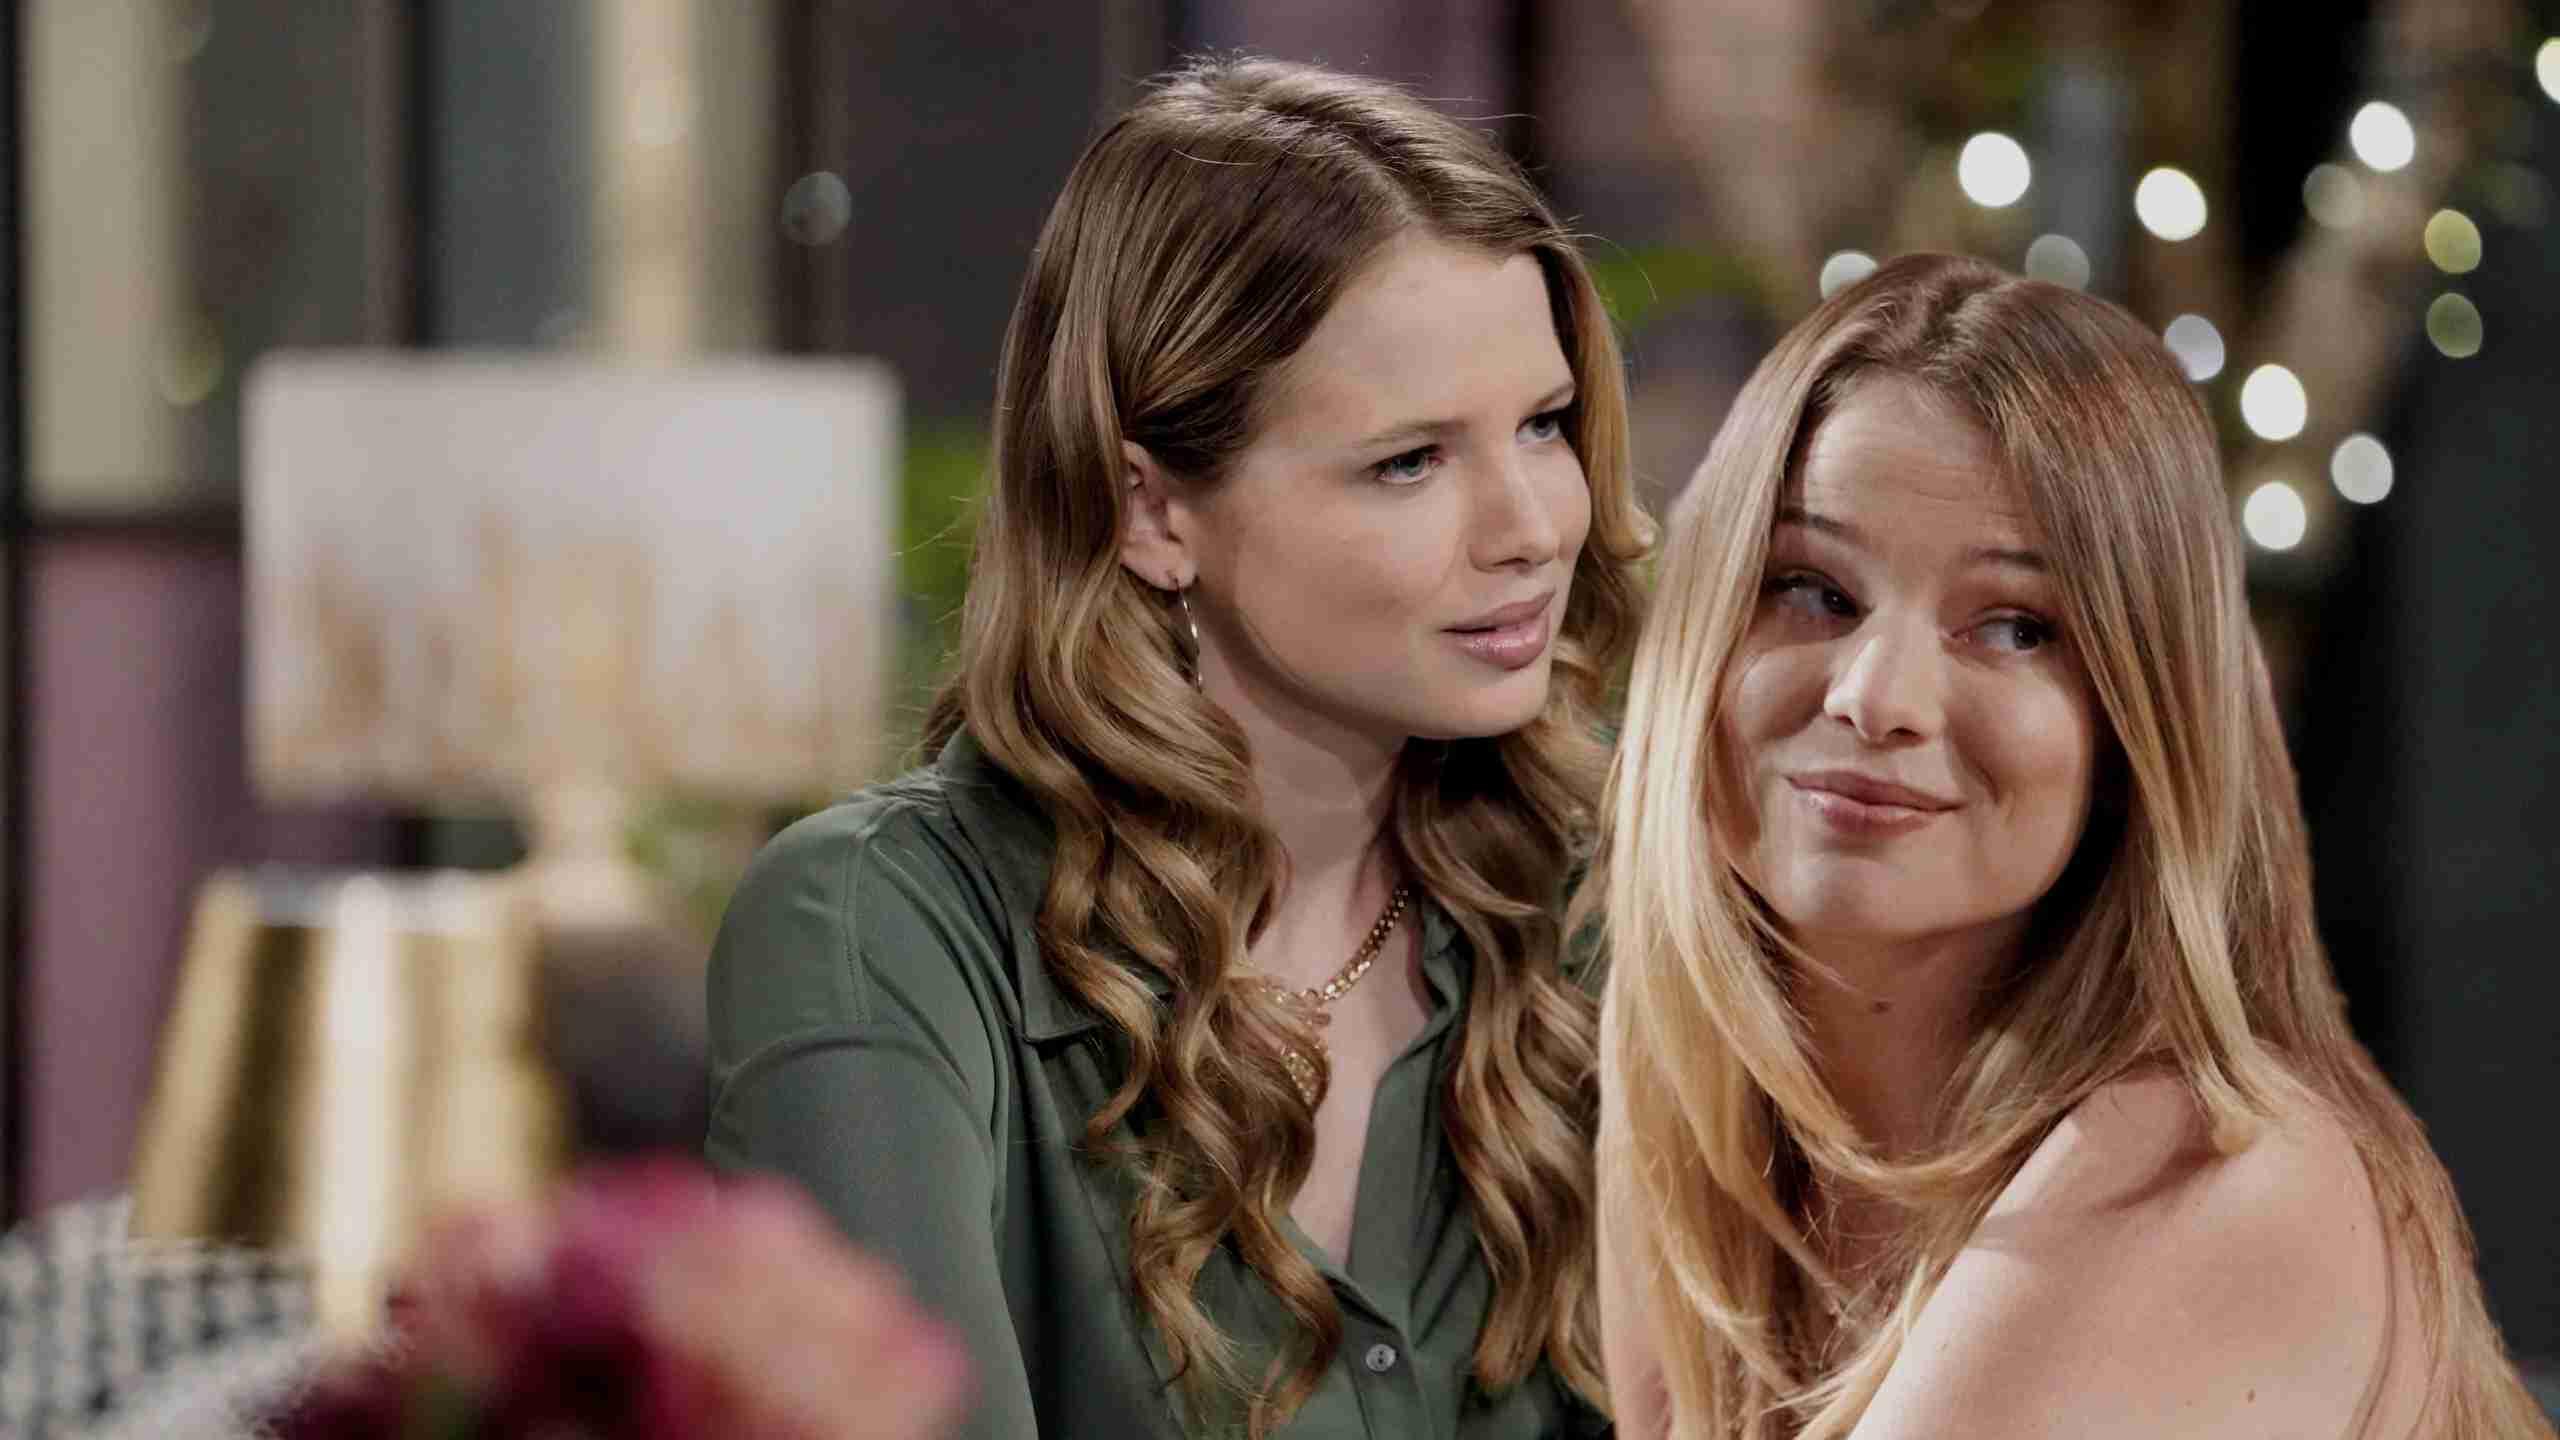 How old is Summer Newman on Young and Restless